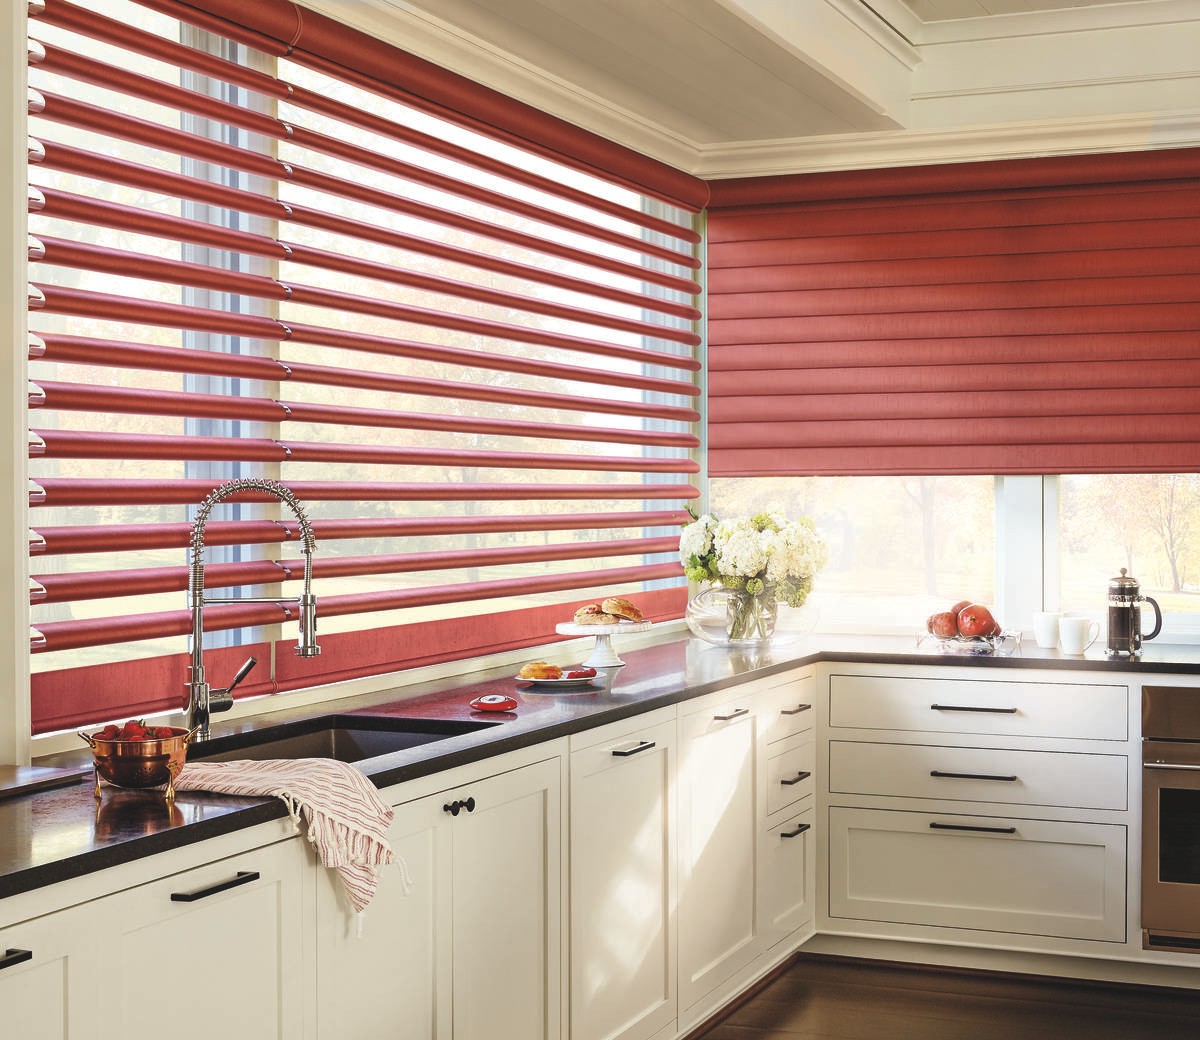 The perfect shade for each room near Yorktown, Virginia (VA) like Pirouette® shades for kitchens.